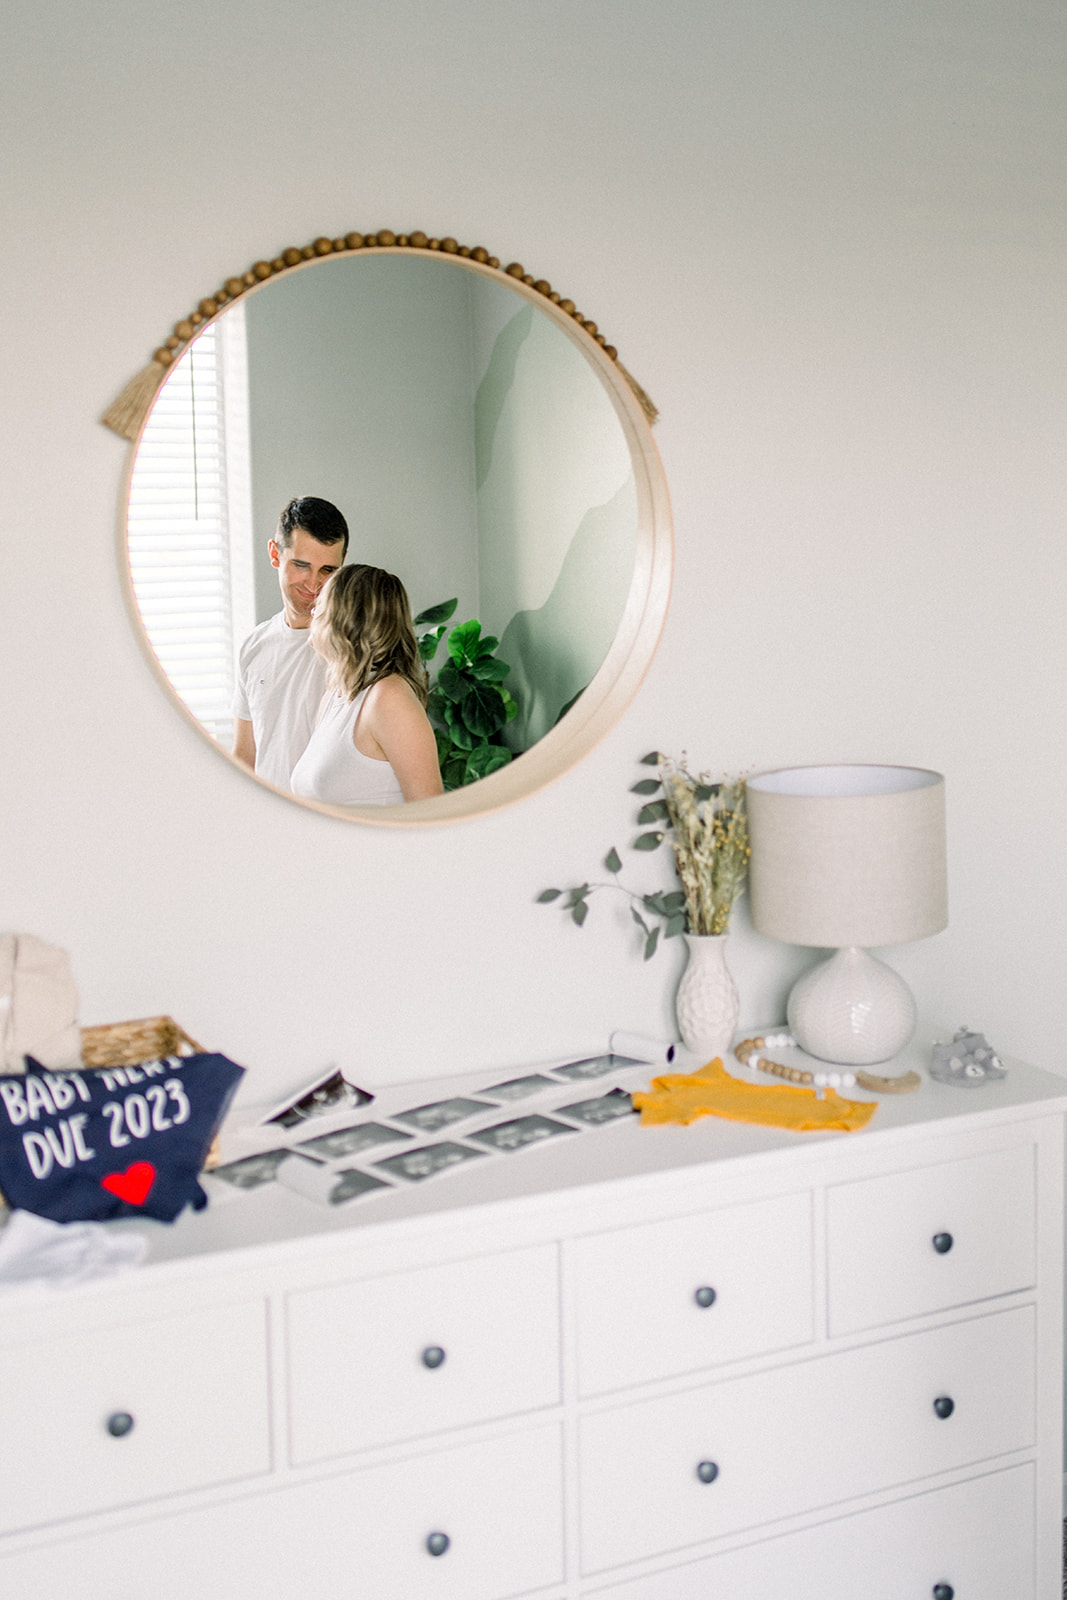 Nursery mirror at In home maternity photo shoot Sonora, CA photographer